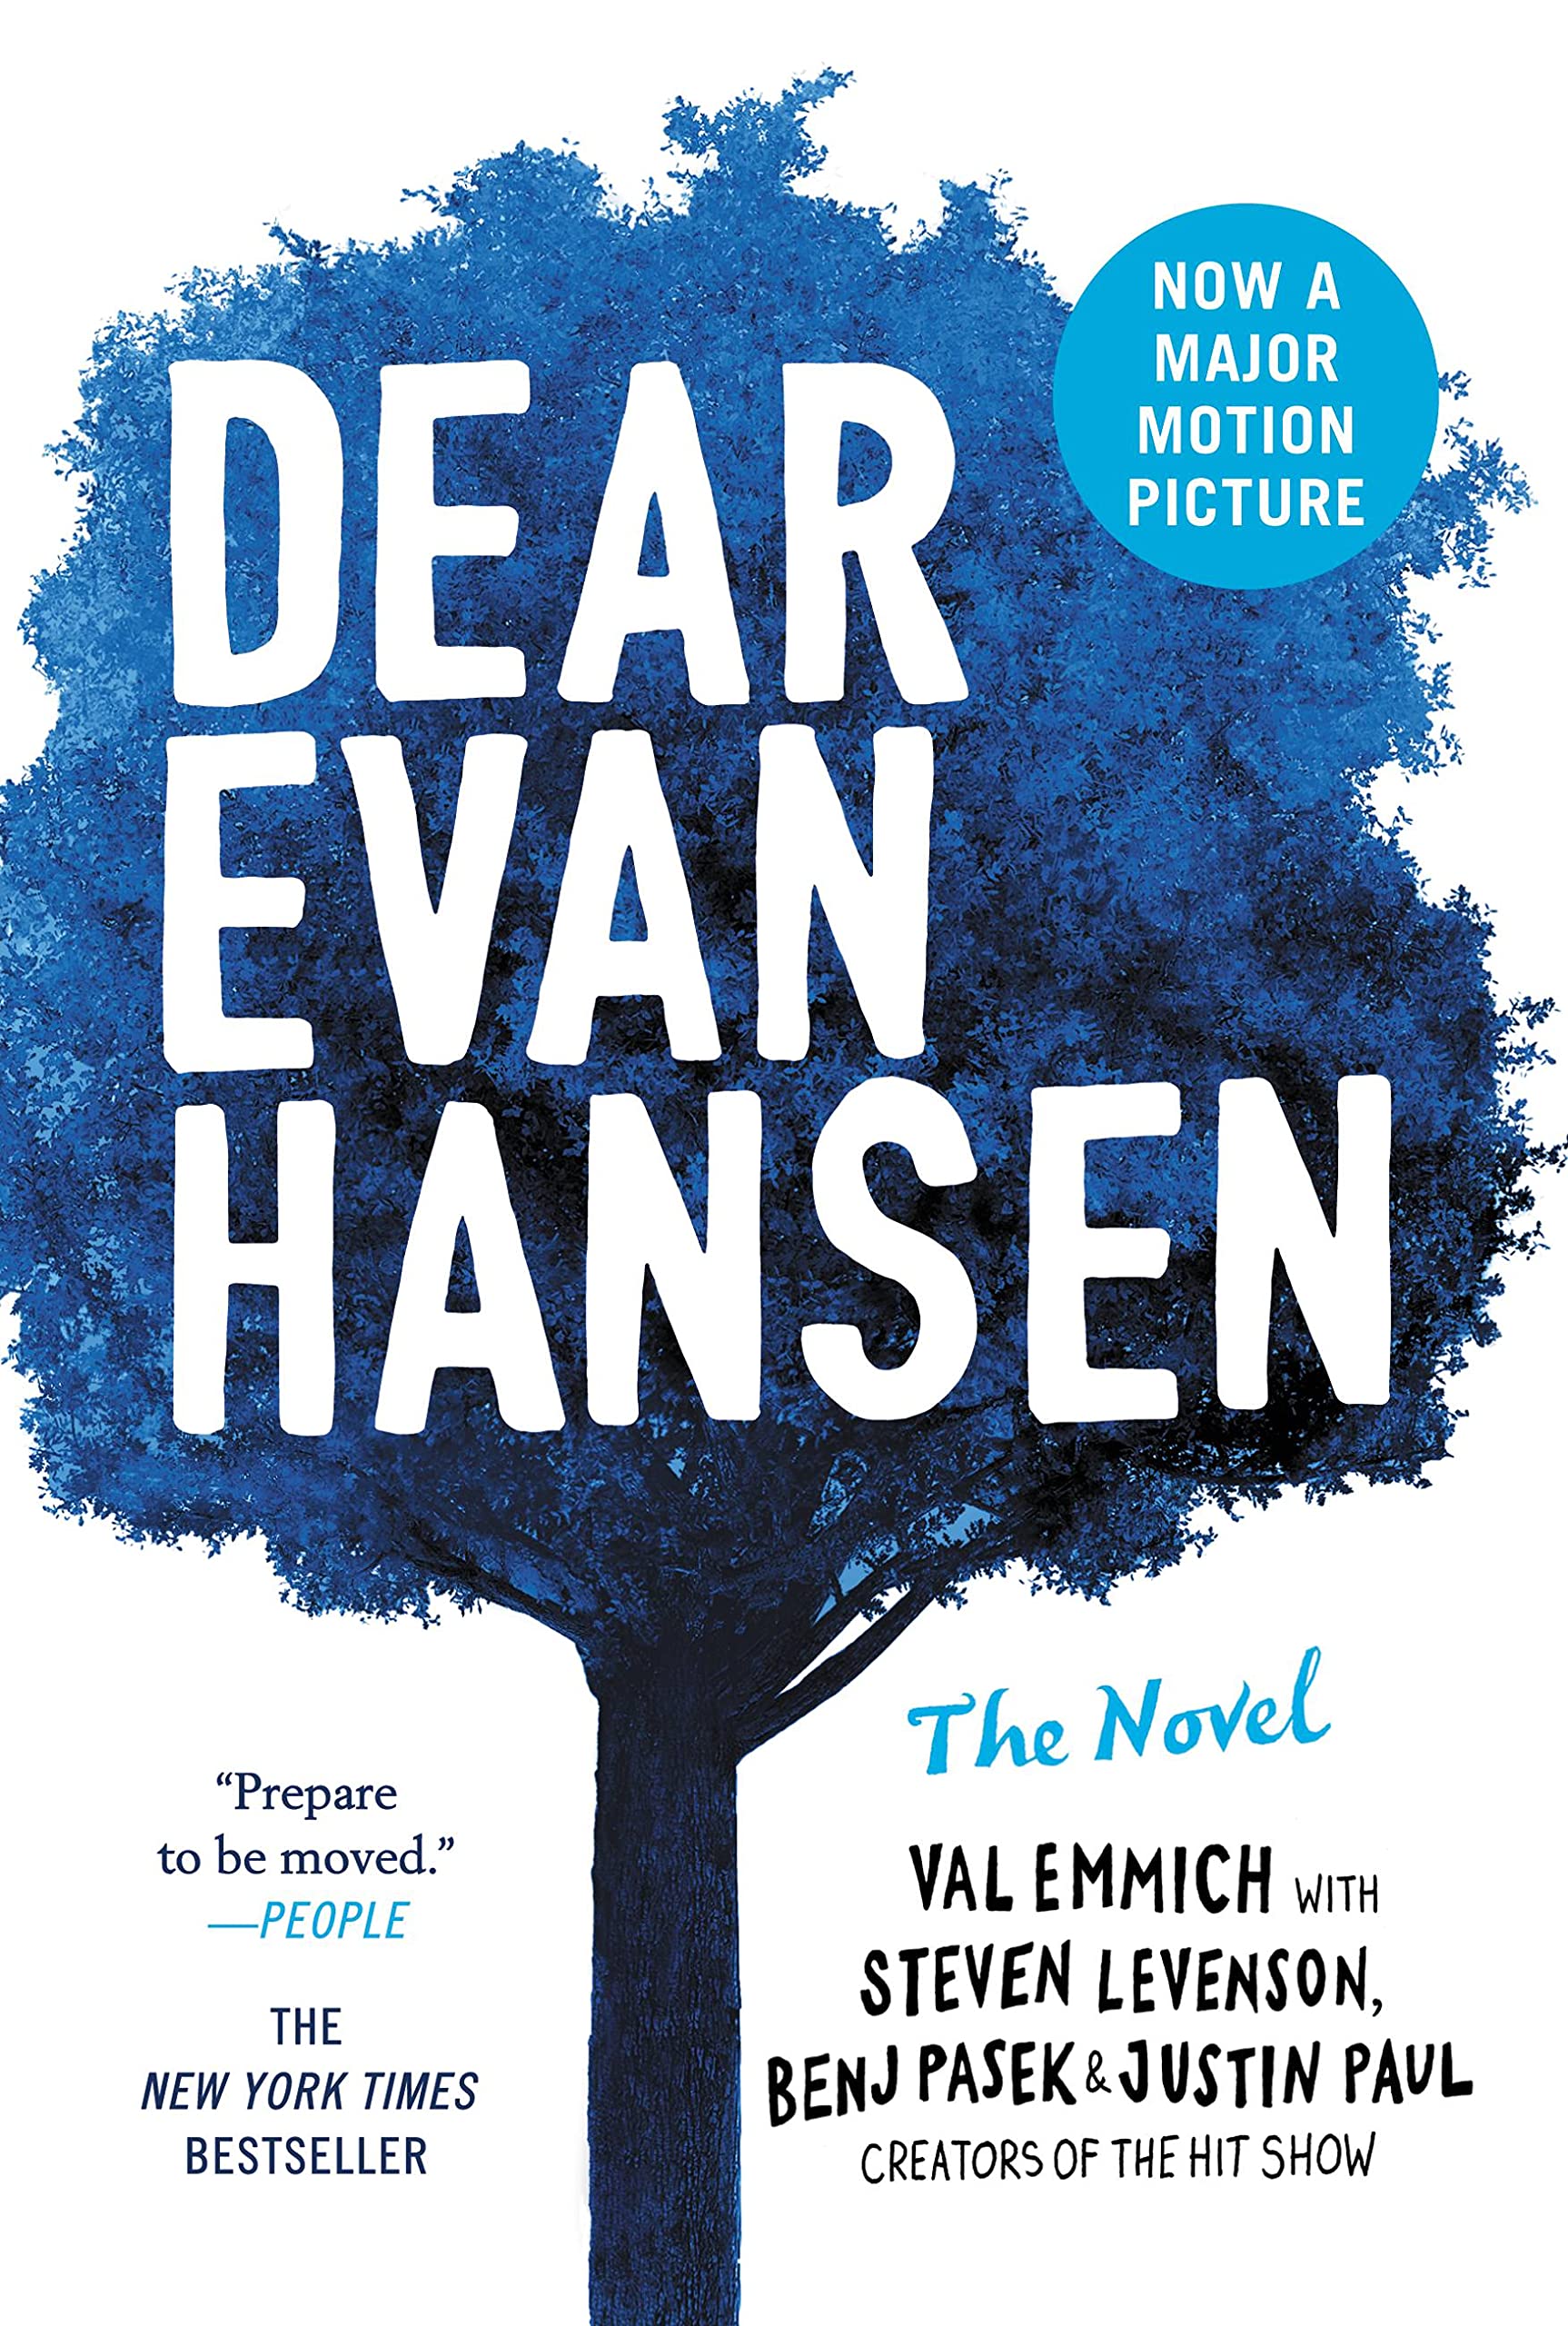 Image of the cover of a book titled Dear Evan Hansen: The Novel. It features a blue tree against a white background.